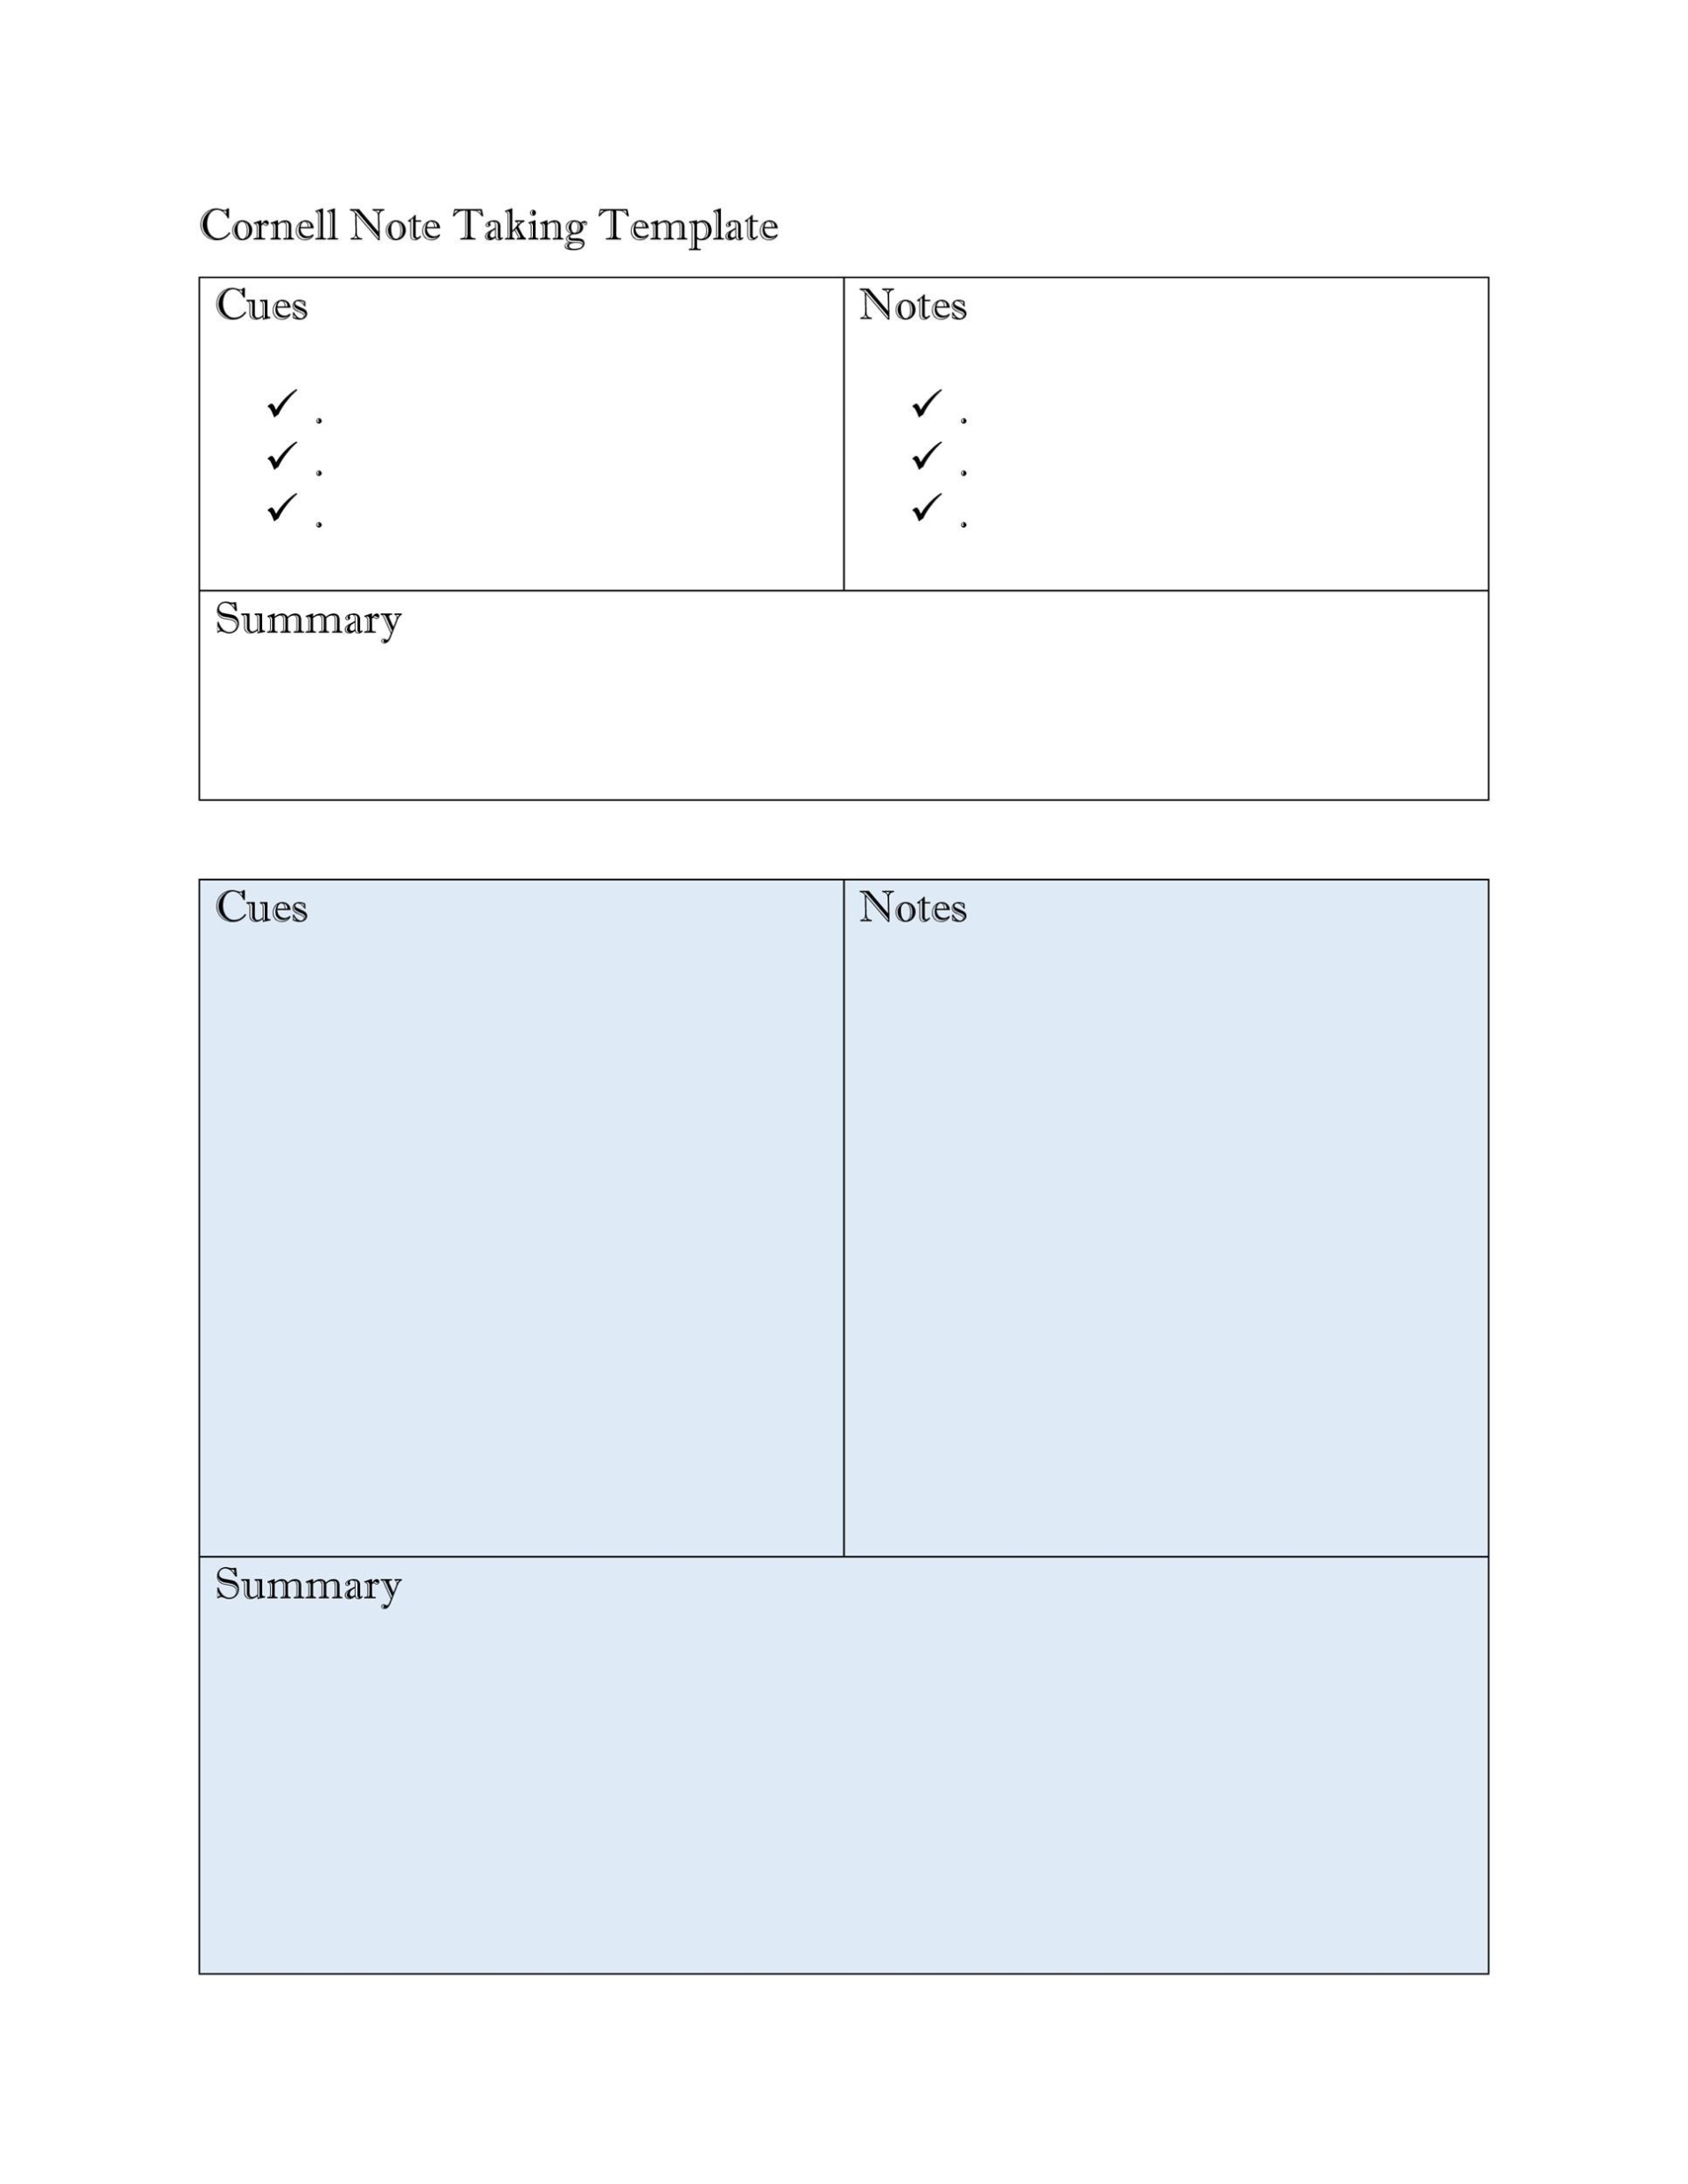 Free Printable Note Taking Templates - Printable Cornell Note Taking Throughout Cornell Note Taking Template Word